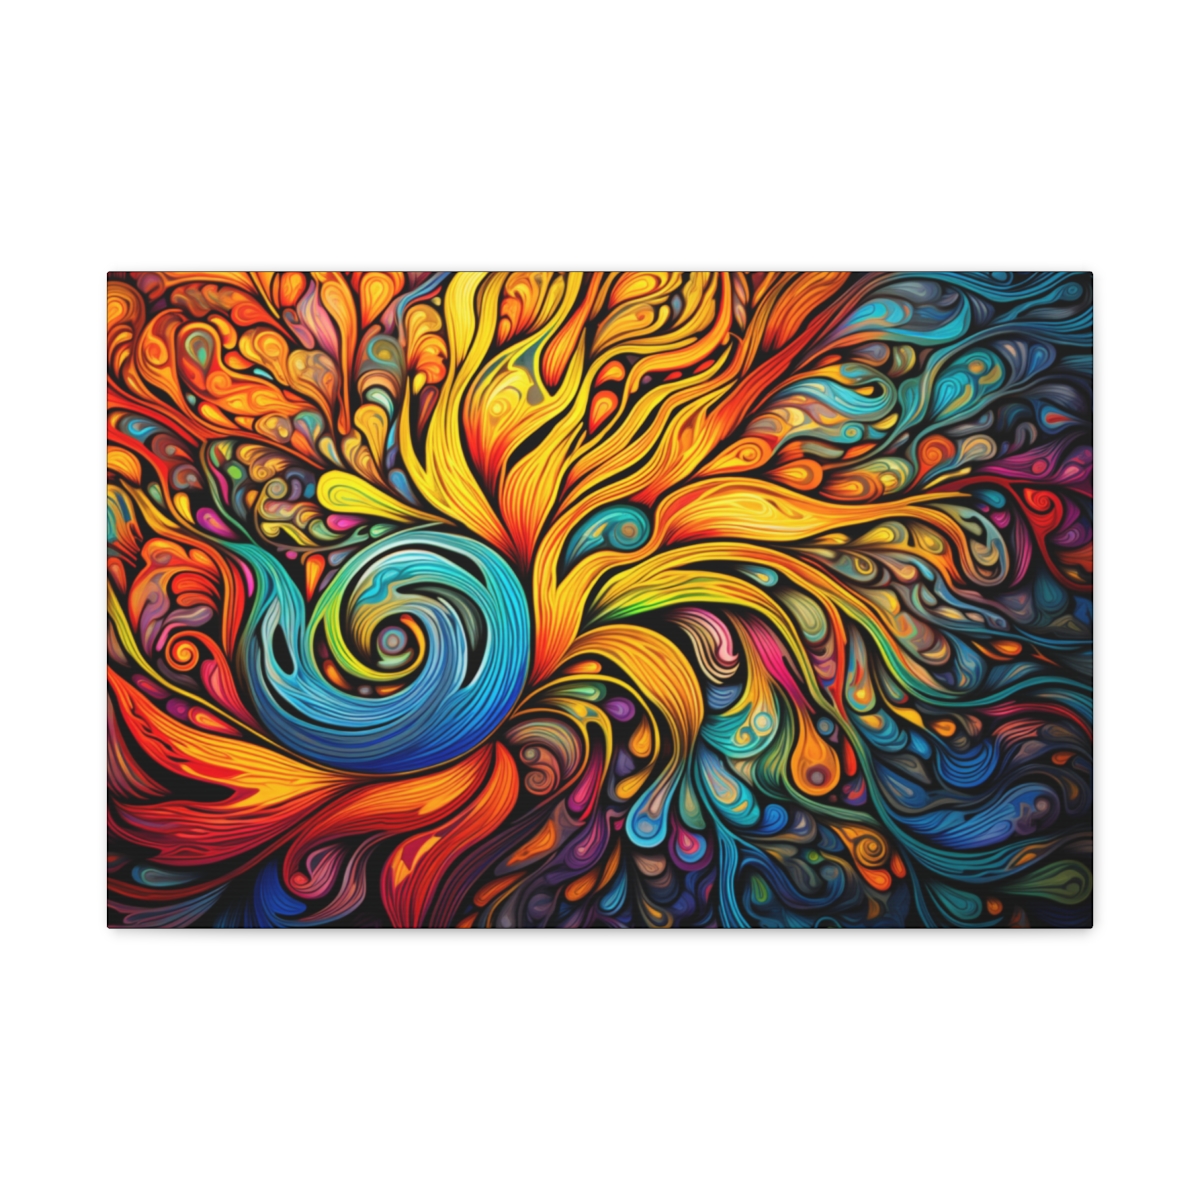 Hippie Psychedelic Art Canvas Print: Make Love, More Love